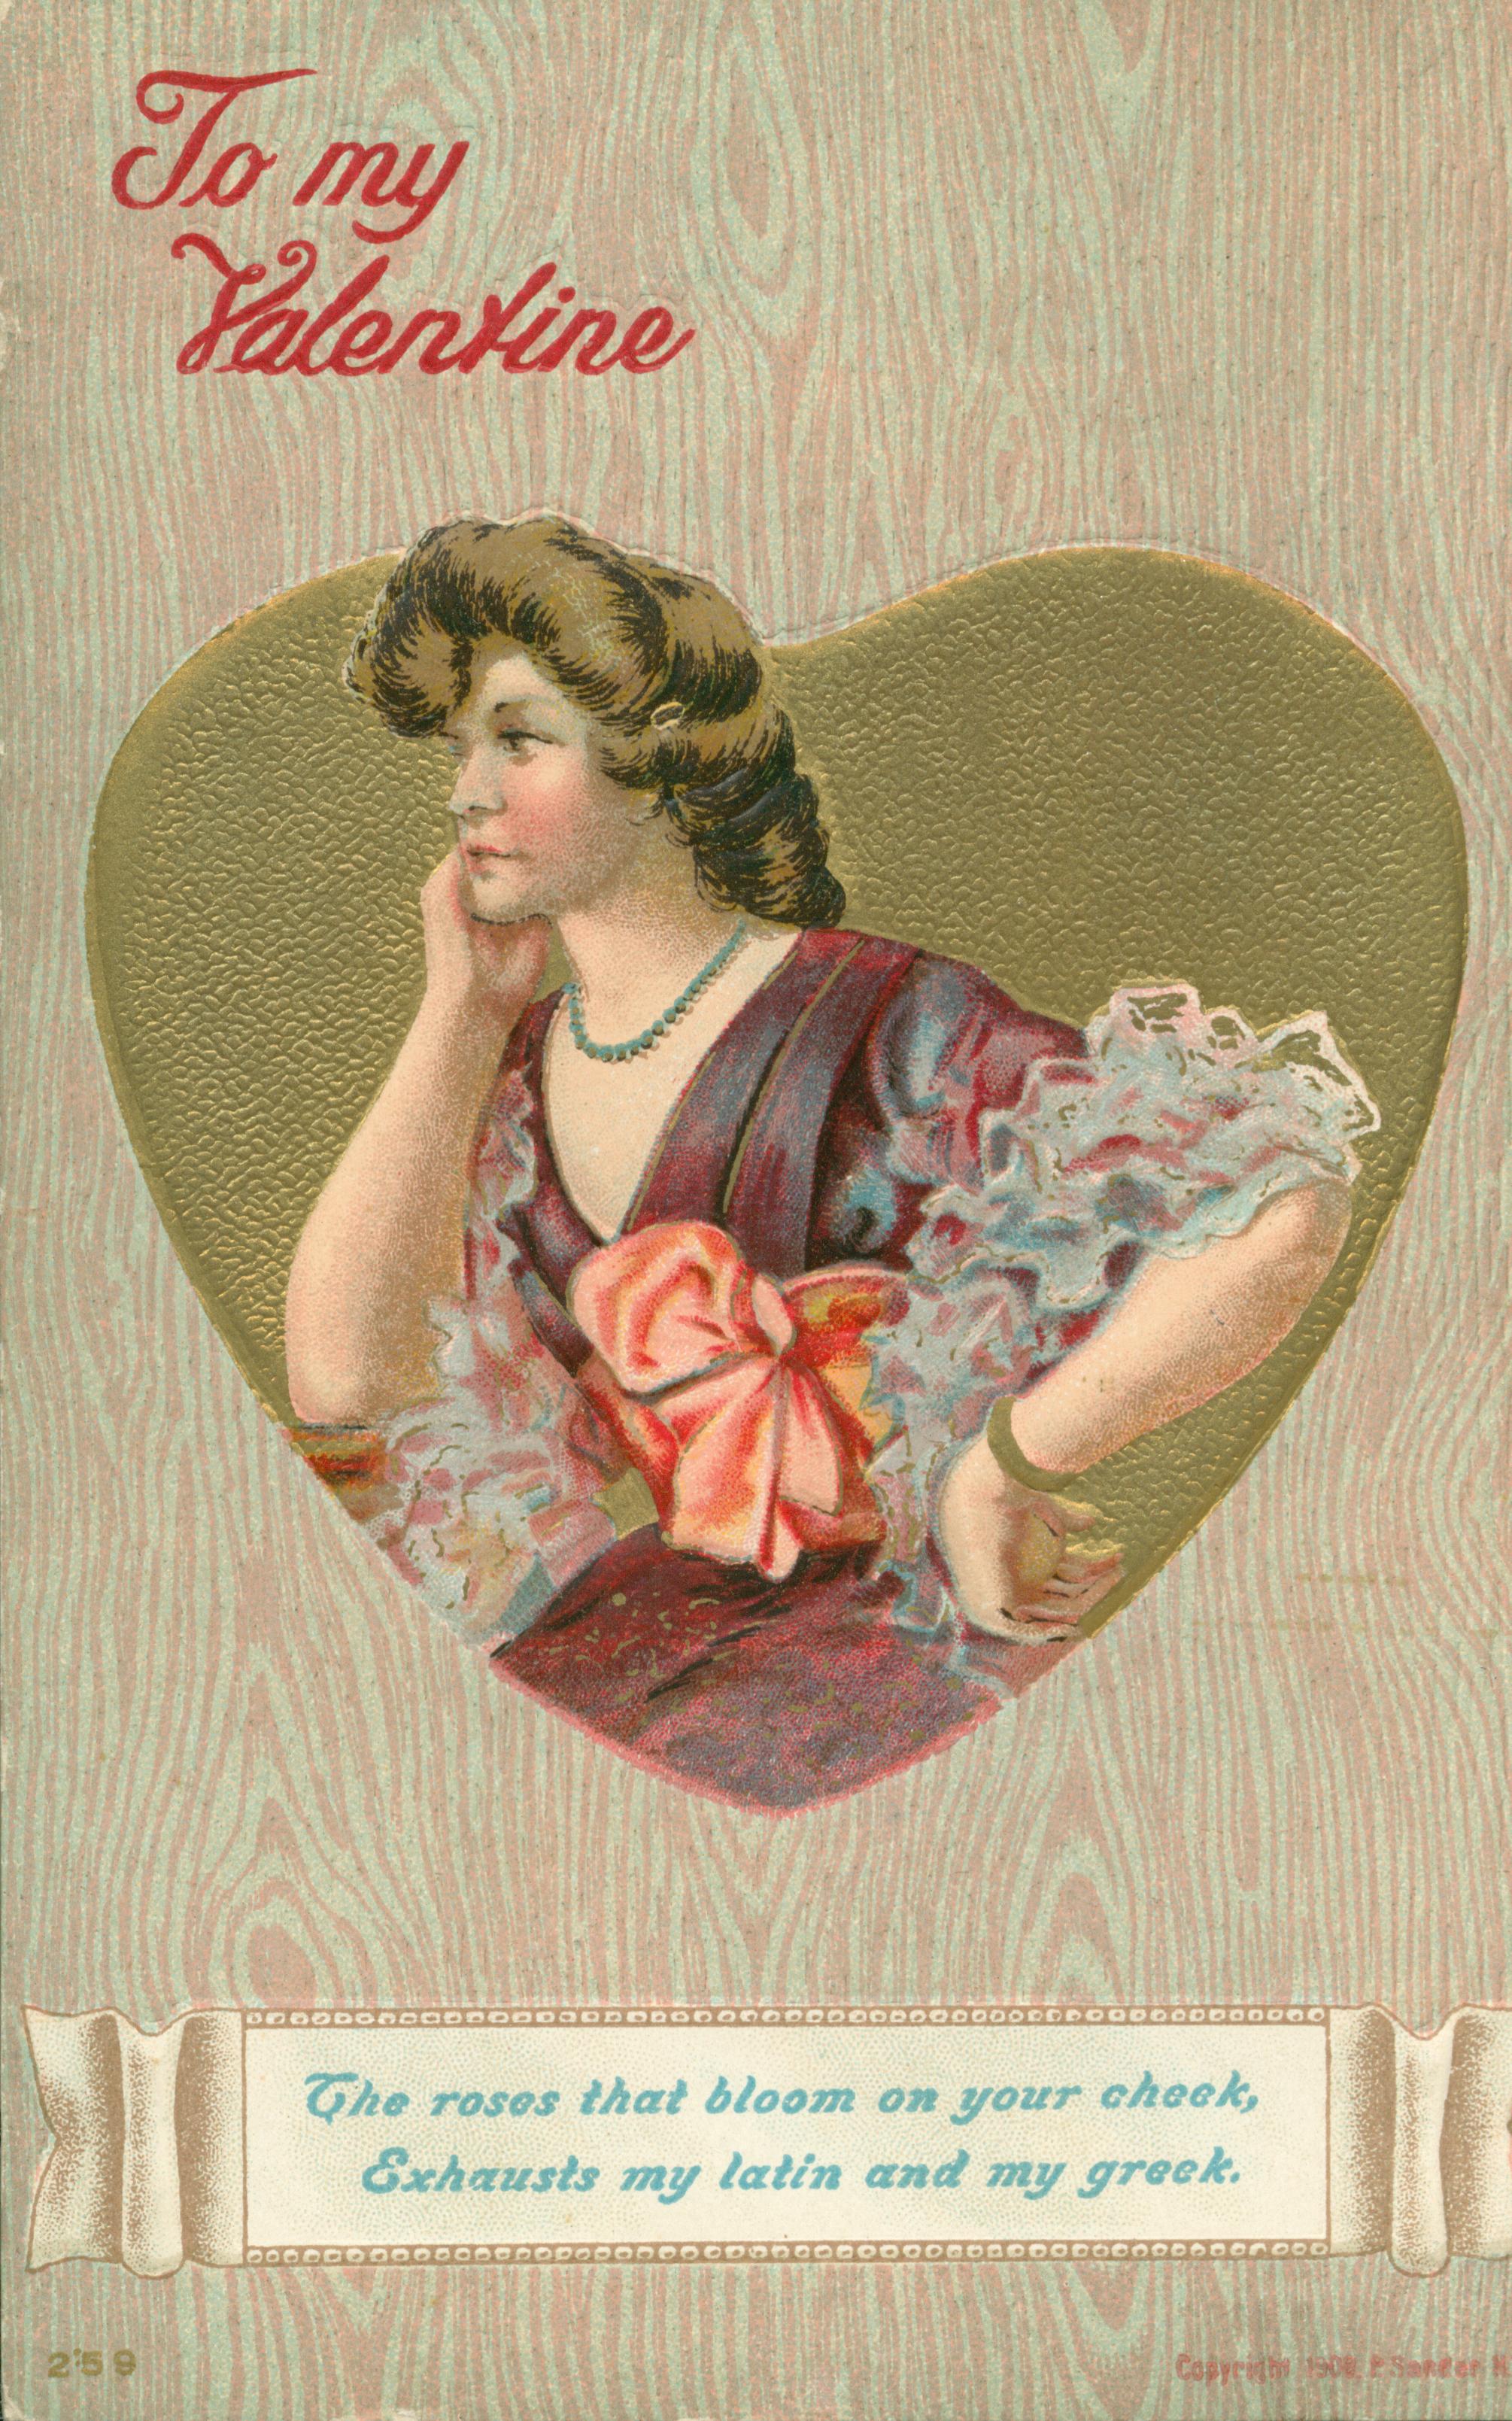 Shows a woman in thought with a heart-shaped vignette, and a poem